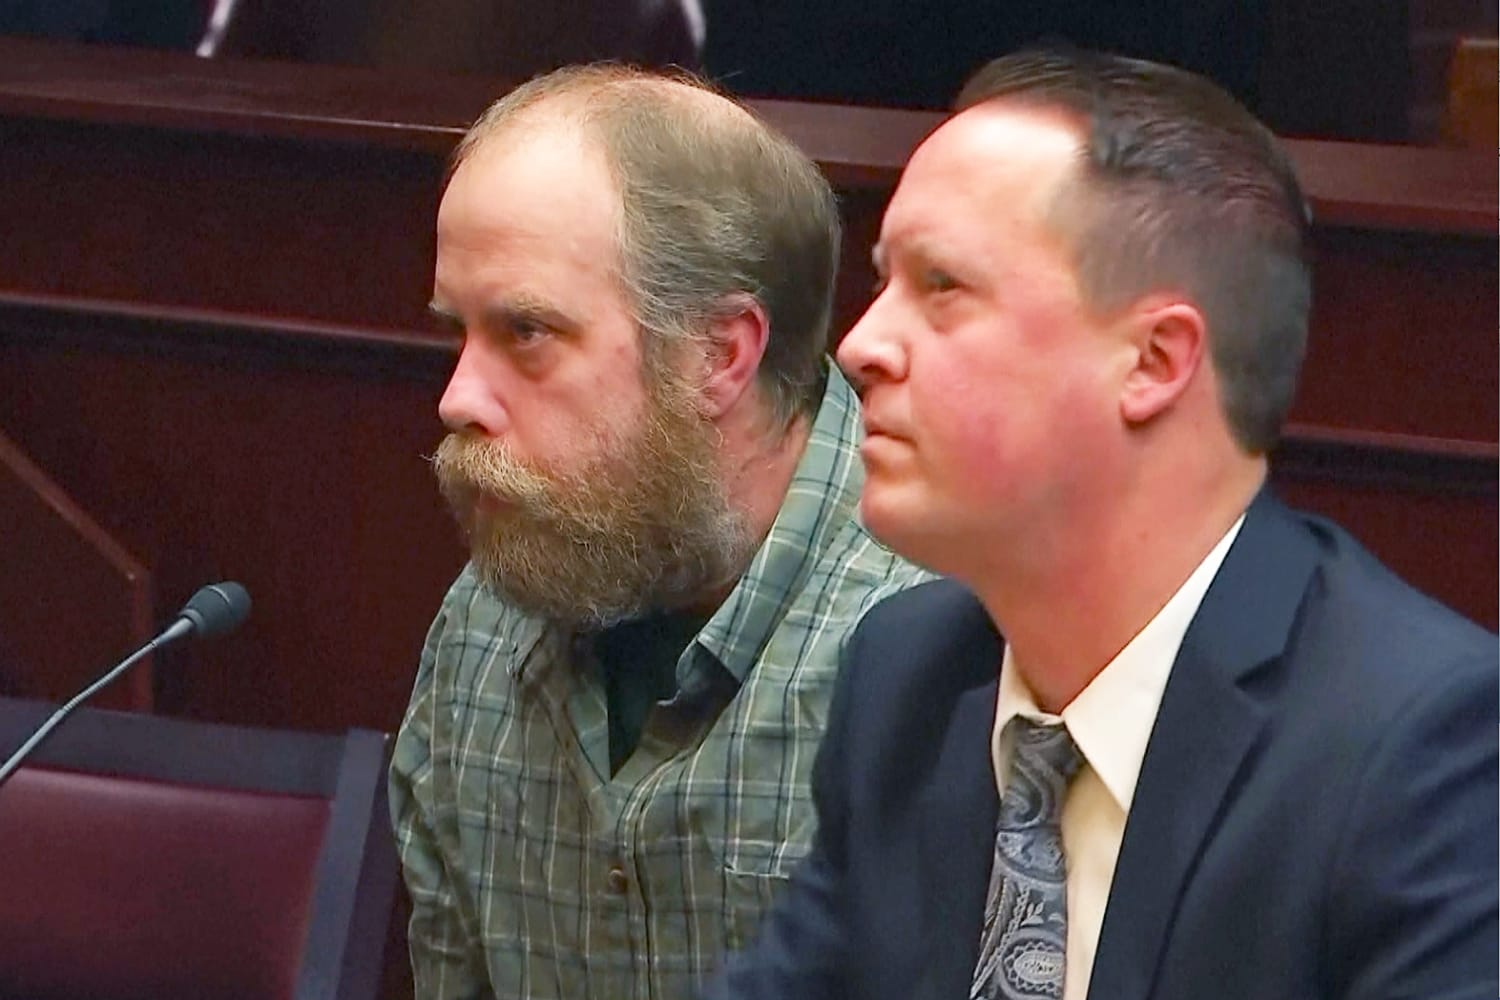 Accused Kidnapper Pleads Guilty in Case of Abducted 9-Year-Old from Upstate New York Park